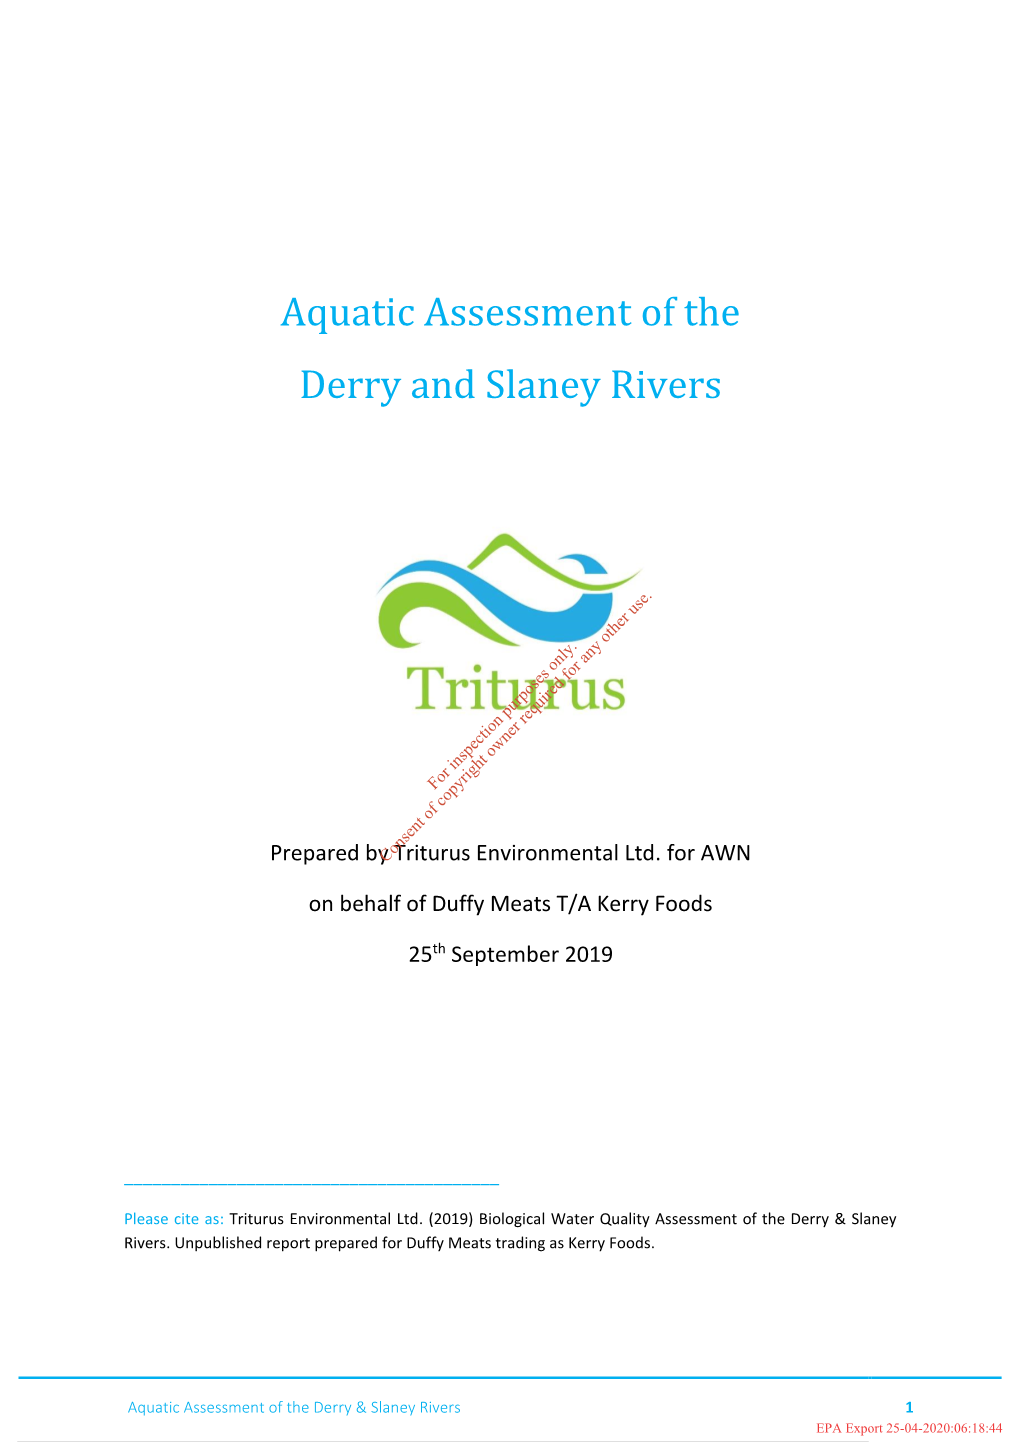 Aquatic Assessment of the Derry and Slaney Rivers